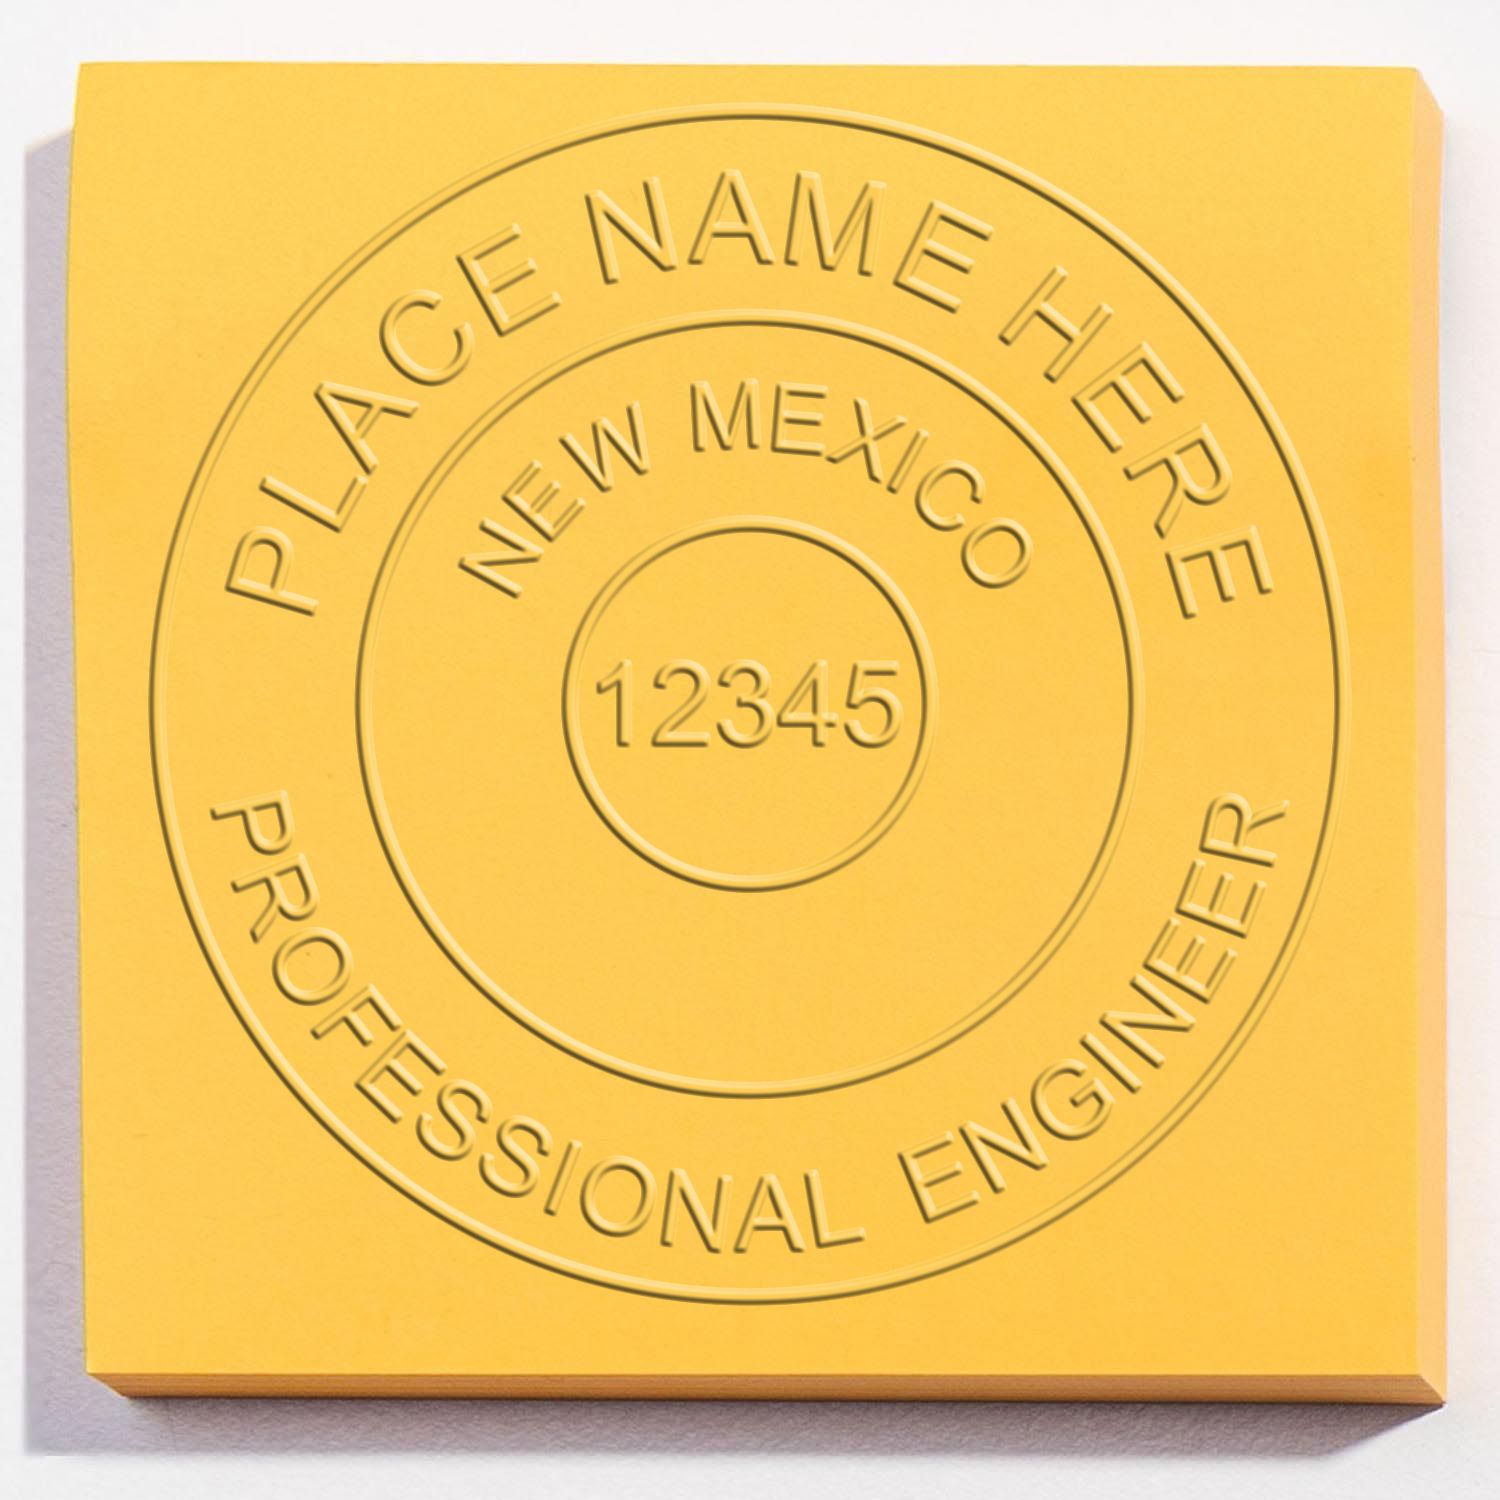 A photograph of the Soft New Mexico Professional Engineer Seal stamp impression reveals a vivid, professional image of the on paper.